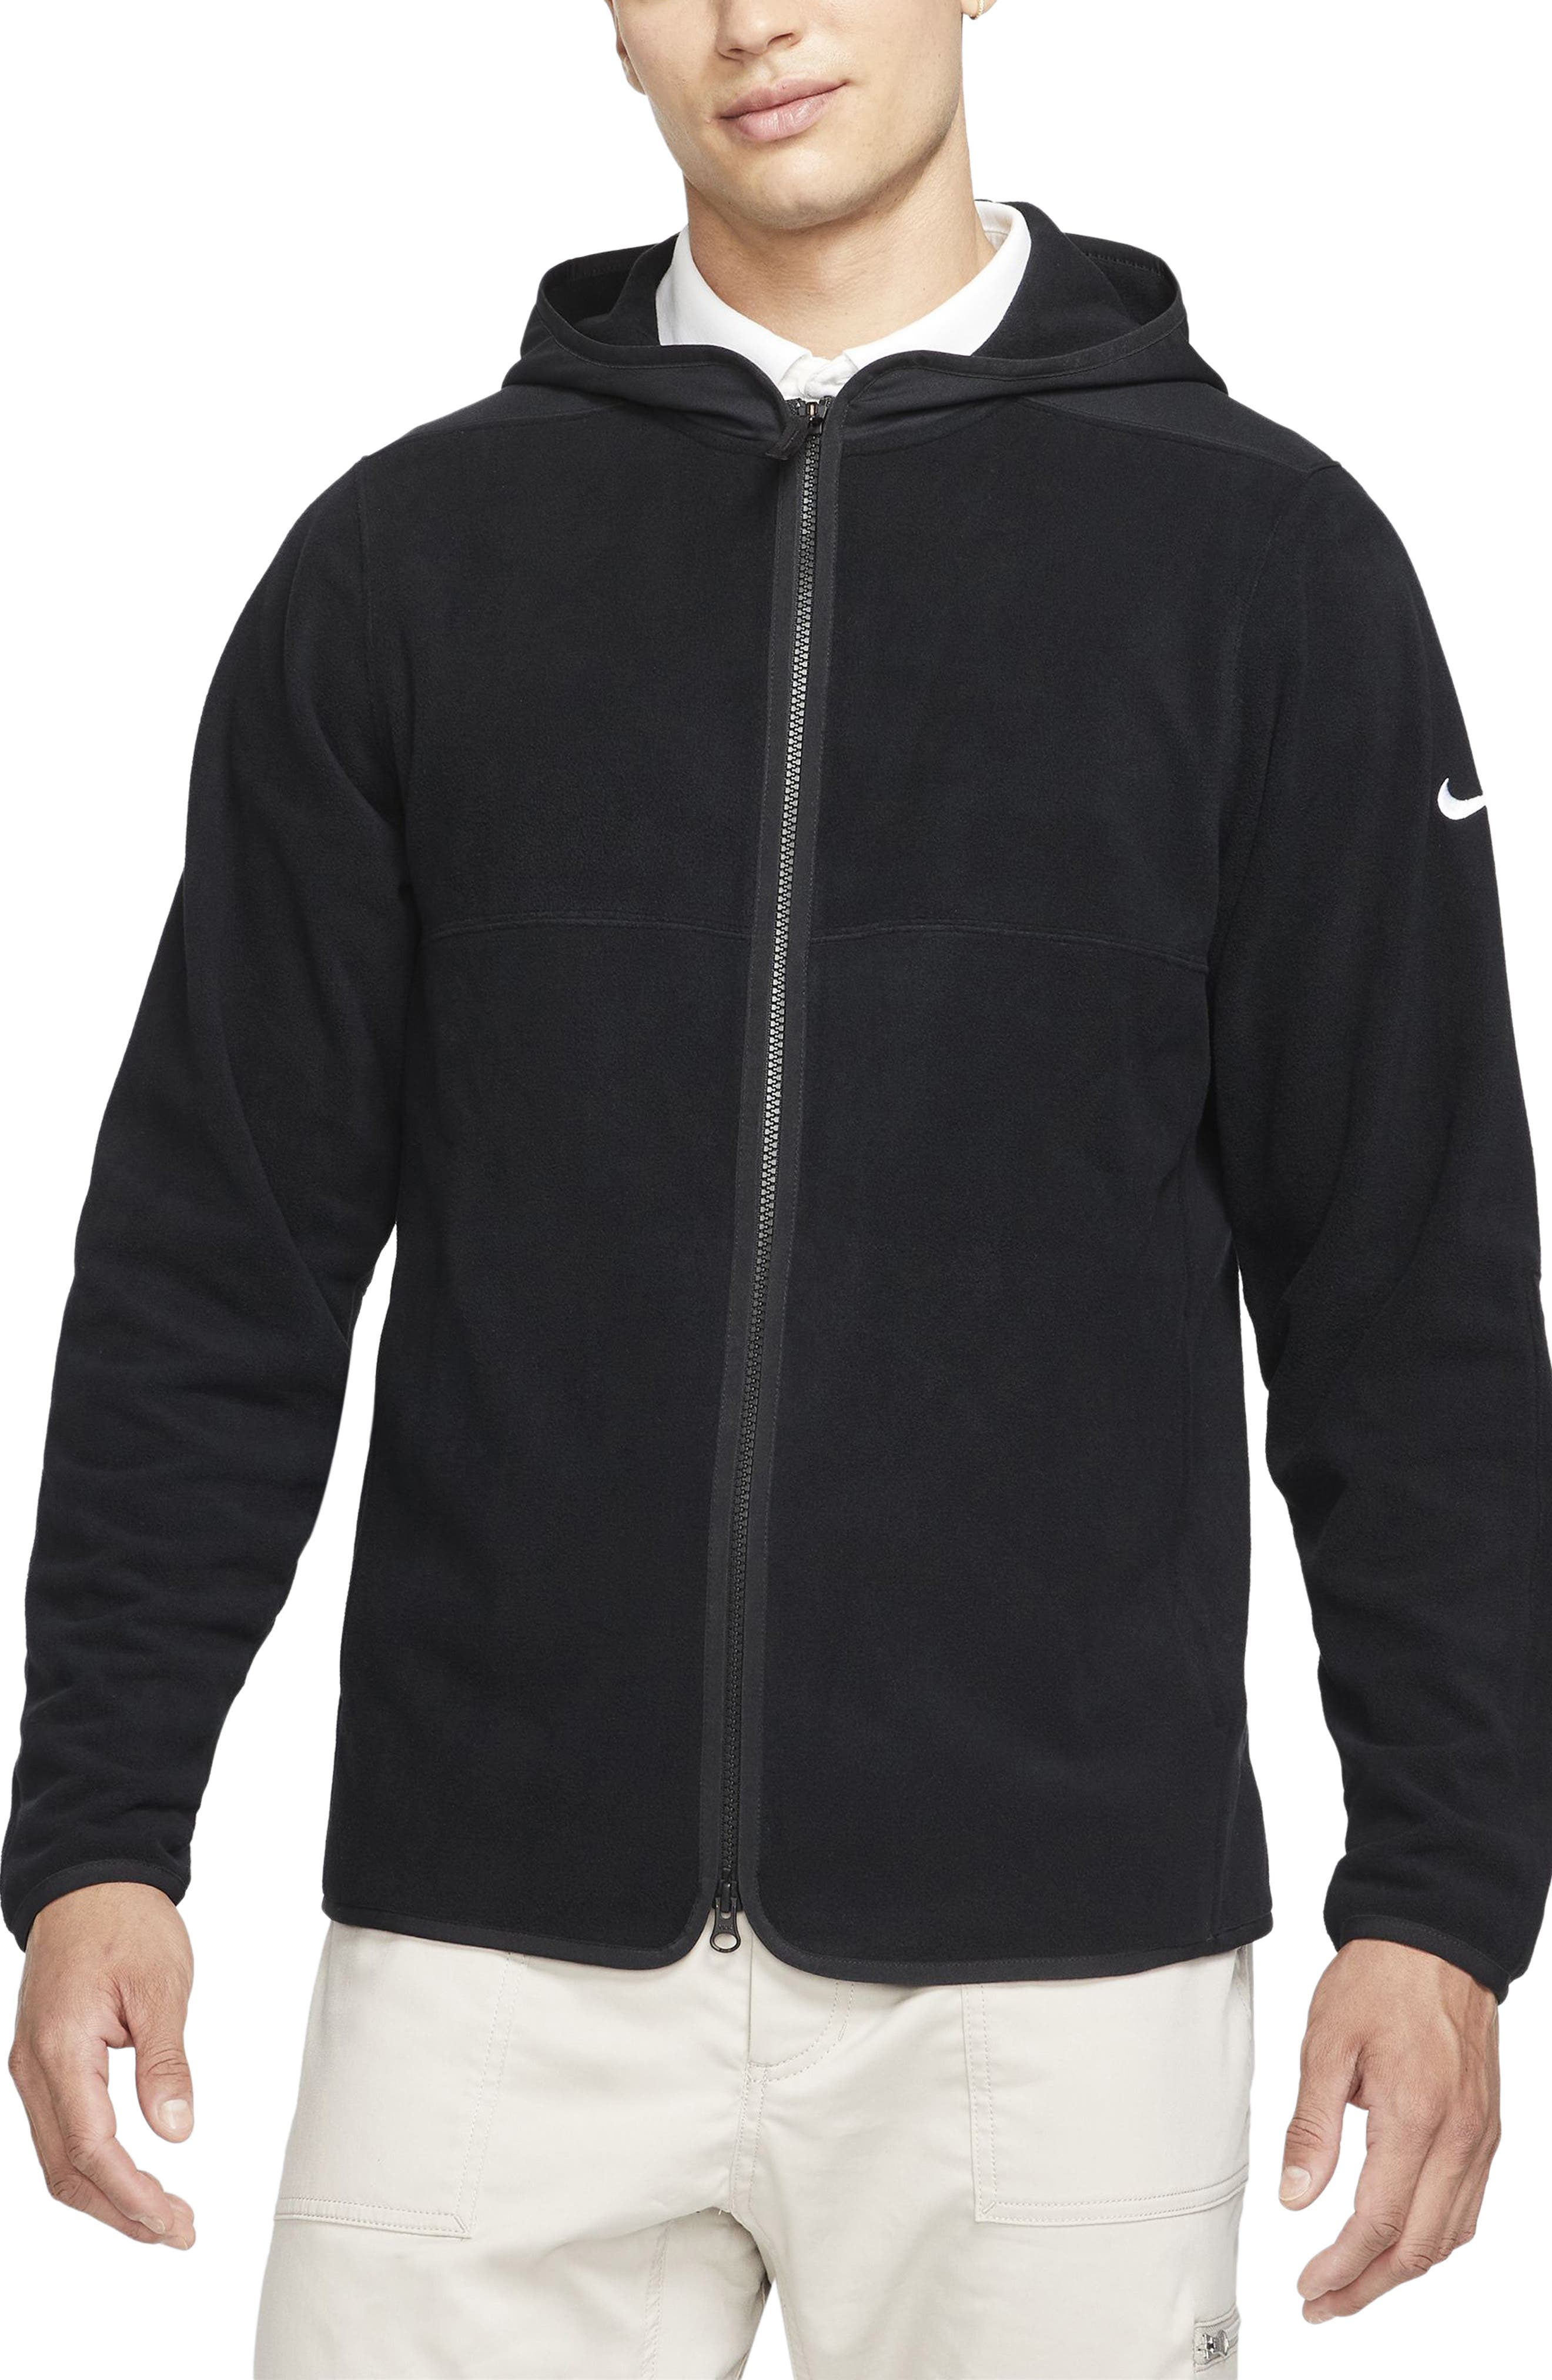 UPC 195240001310 product image for Nike Golf Nike Therma-FIT Victory Zip Golf Hoodie in Black/Black/Black/White at  | upcitemdb.com